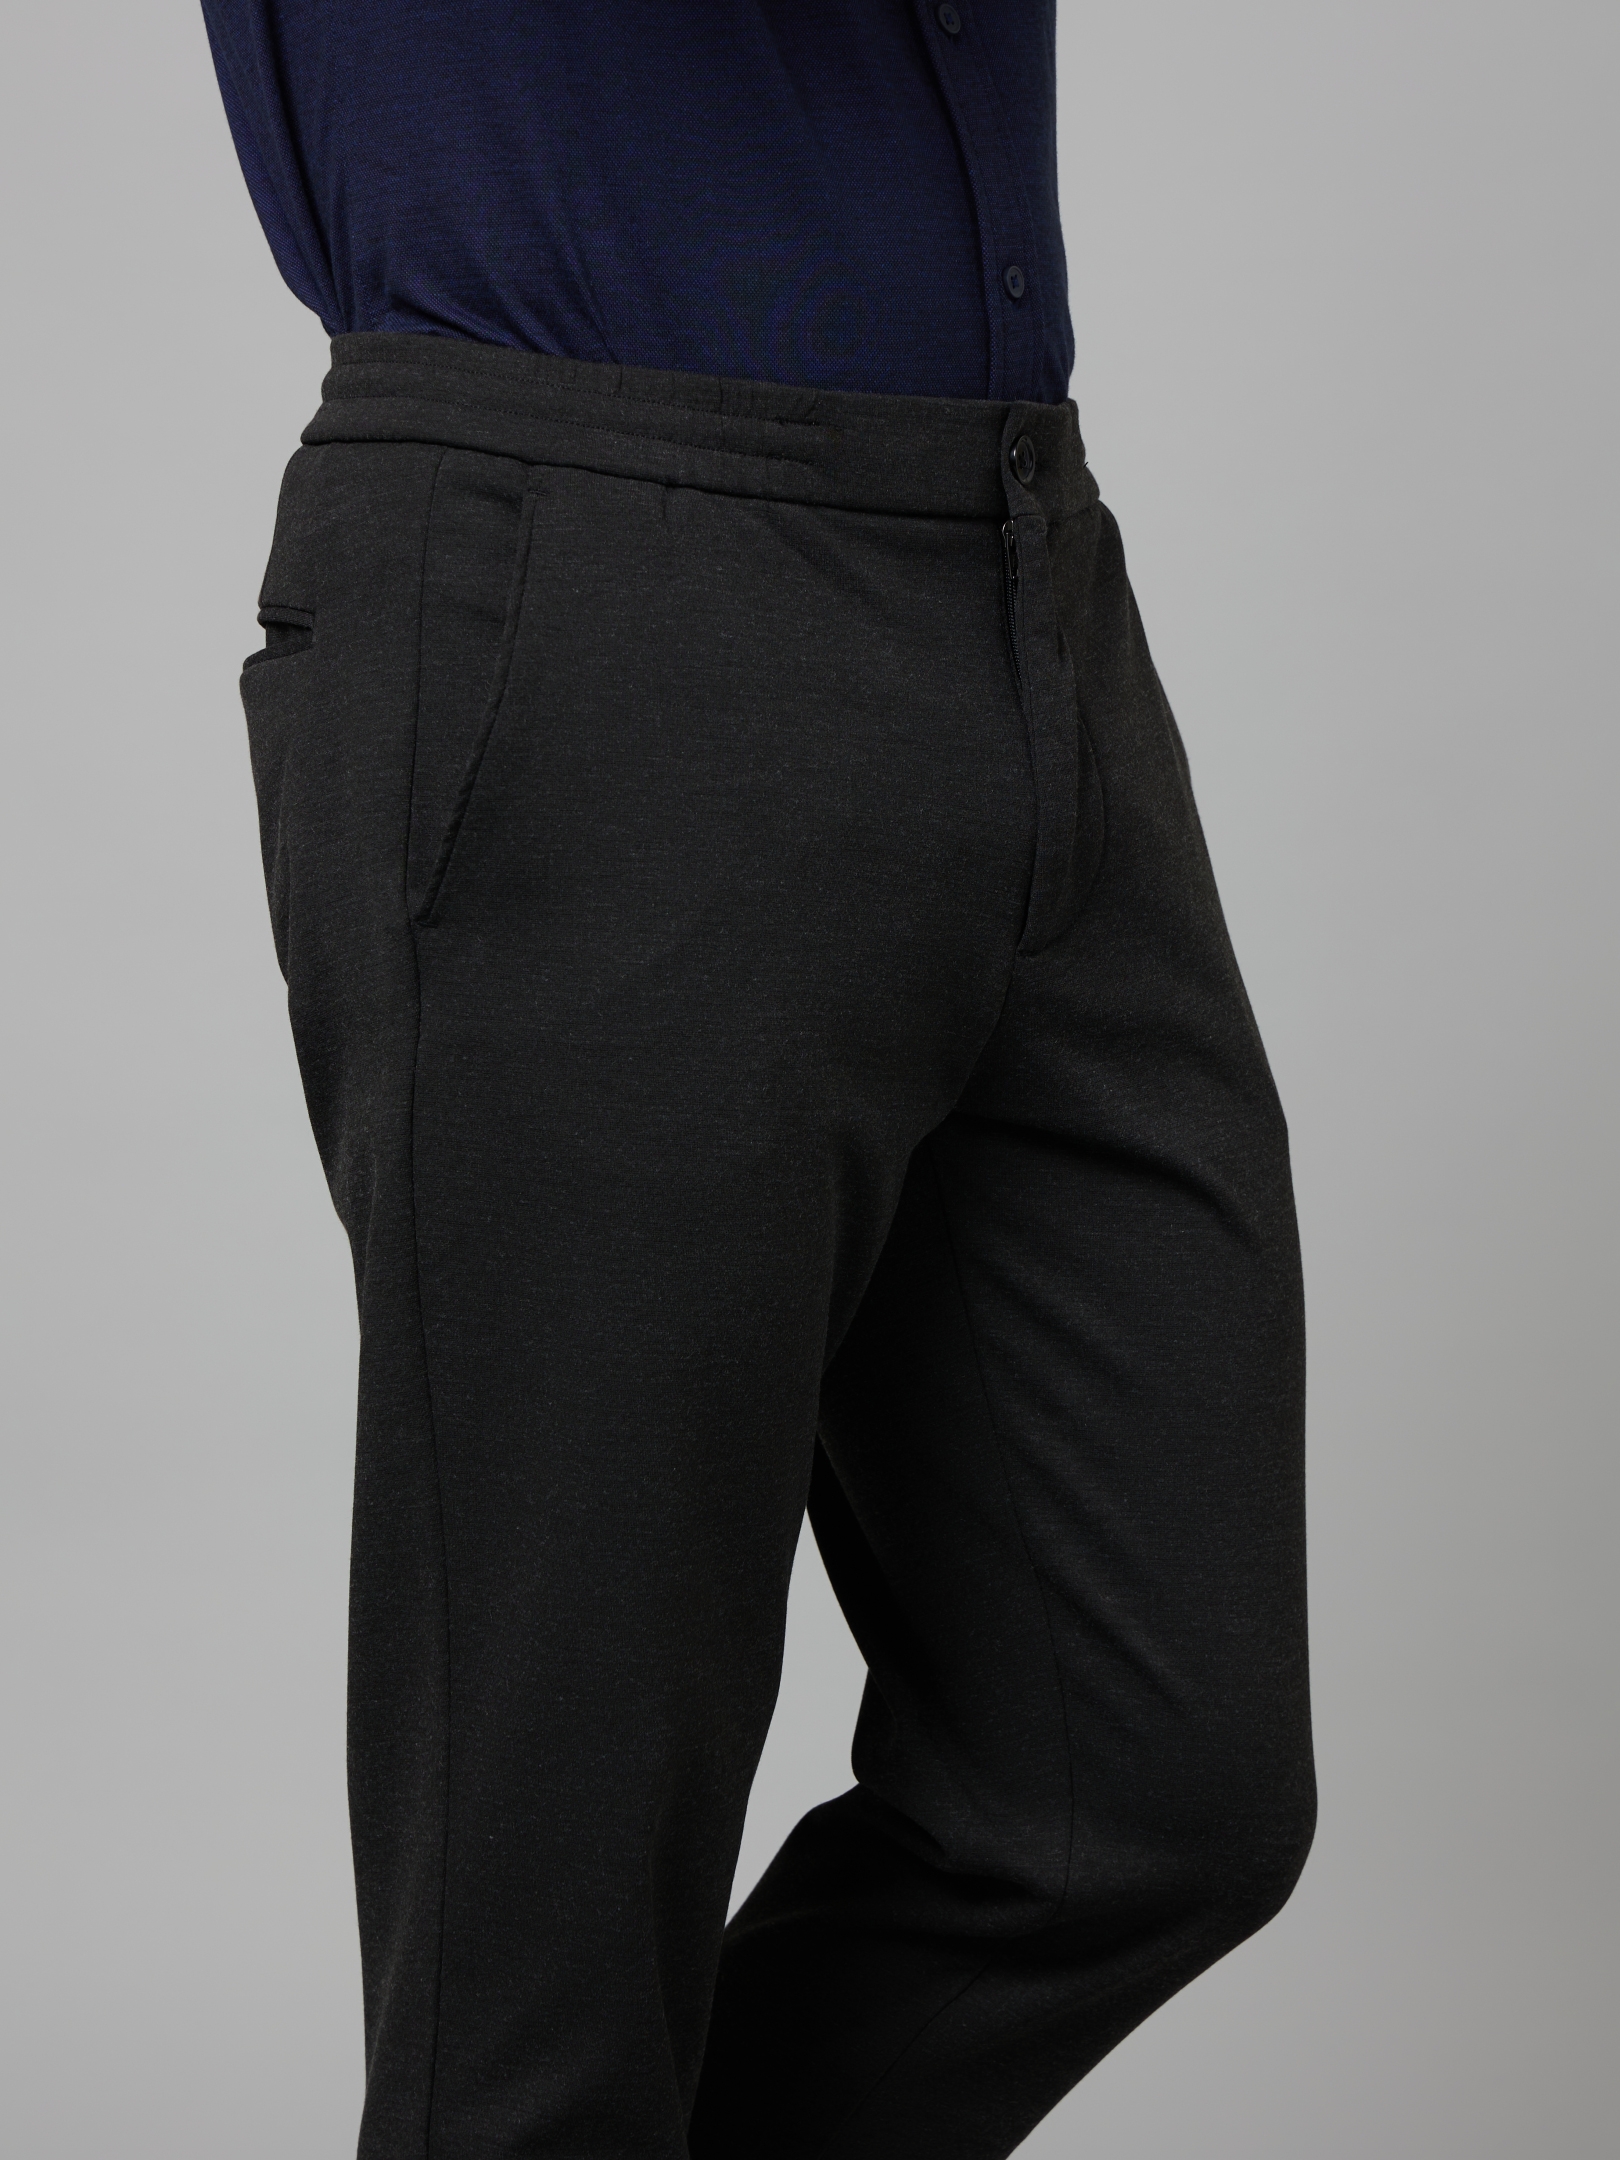 Men's Black Polyester Solid Trousers